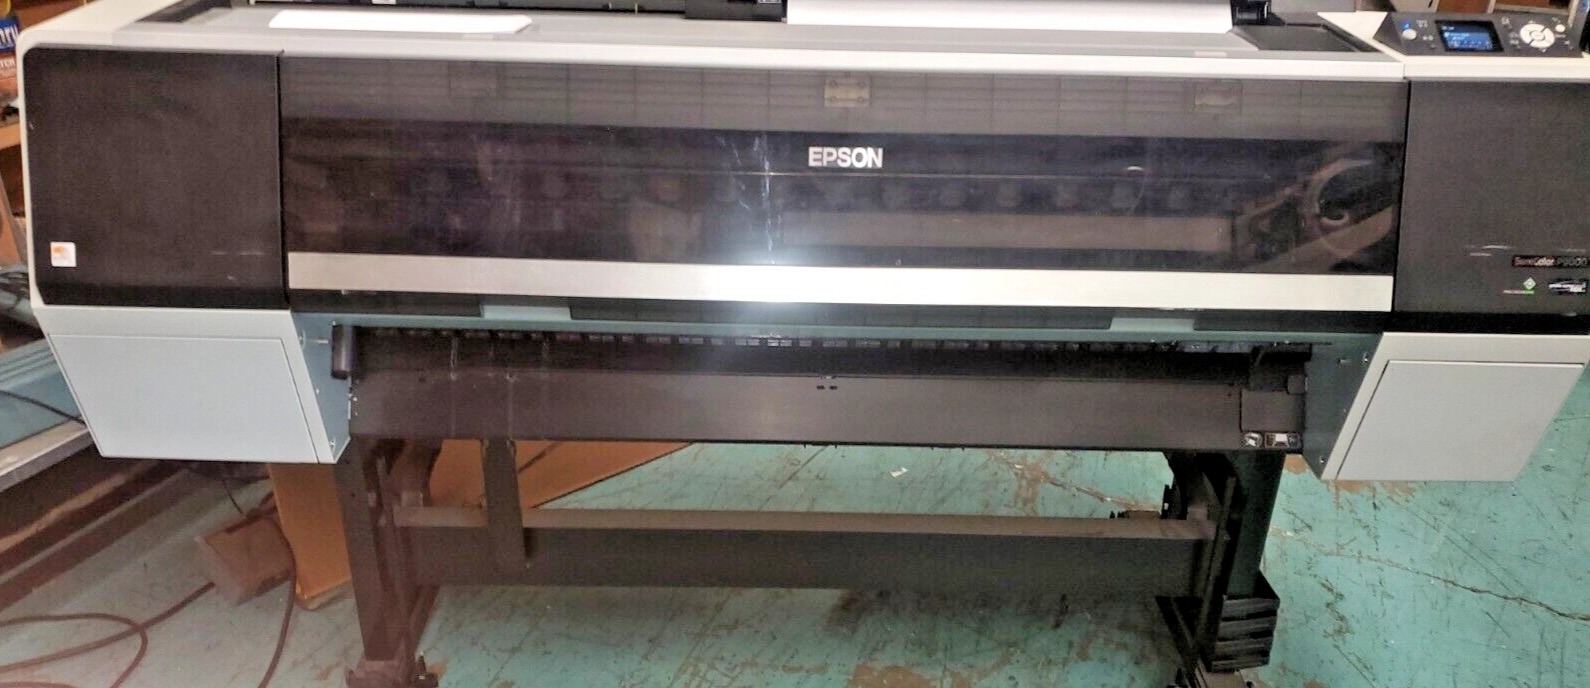 EPSON P9000 PLOTTER USED SOLD ASIS AS DESCRIBED FU